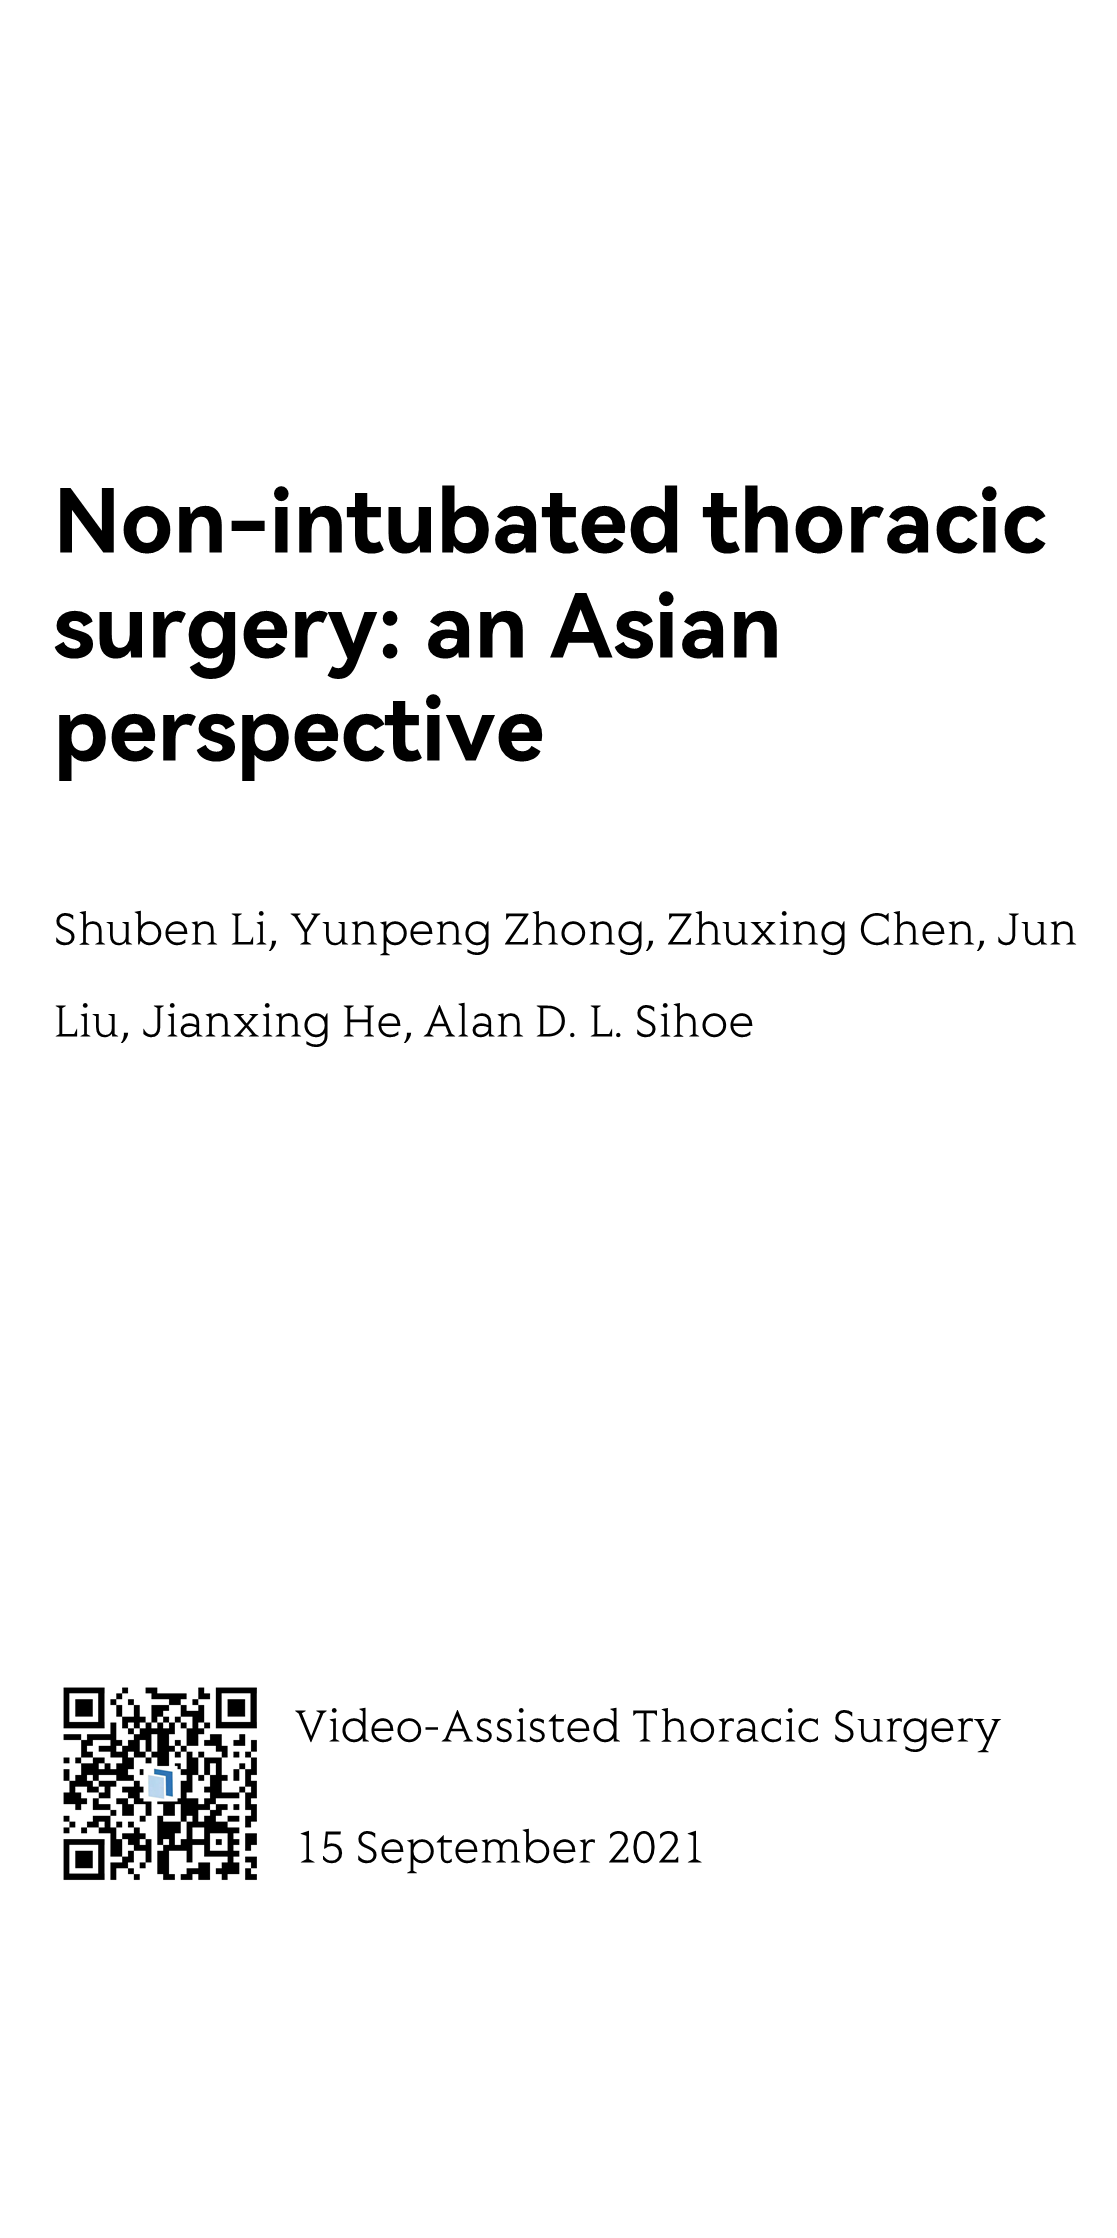 Non-intubated thoracic surgery: an Asian perspective_1